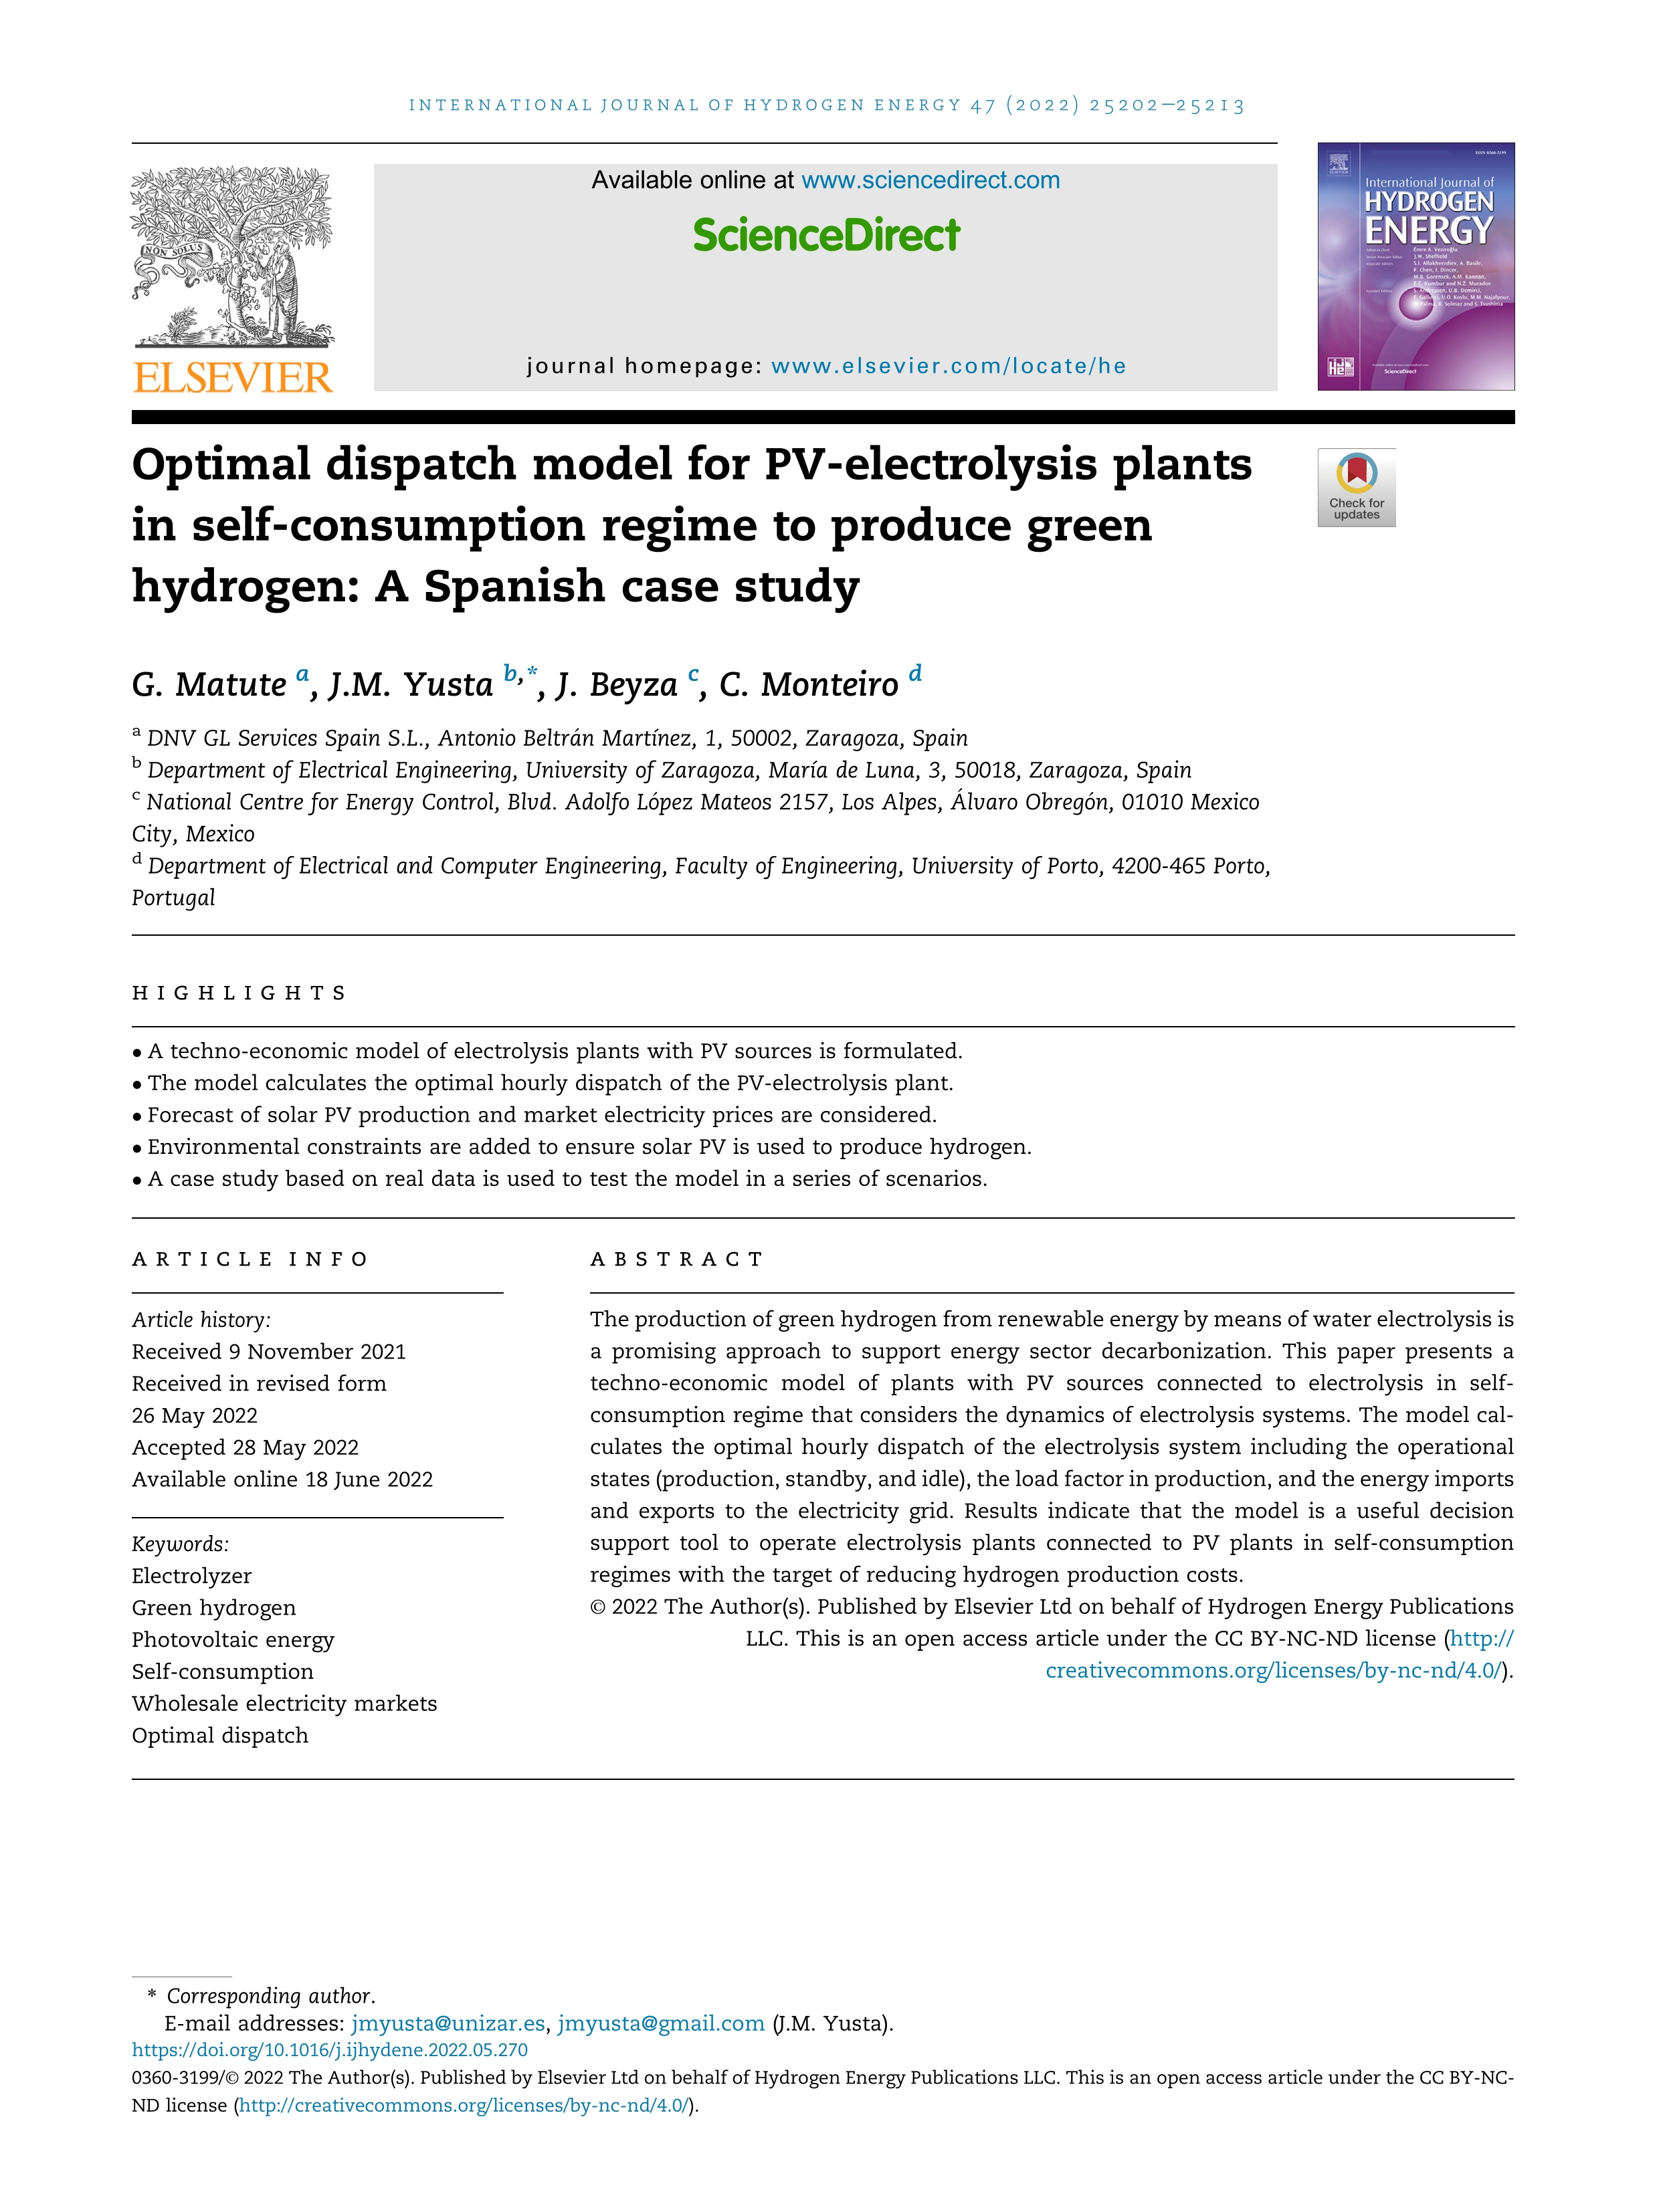 Optimal dispatch model for PV-electrolysis plants in self-consumption regime to produce green hydrogen: a Spanish case study